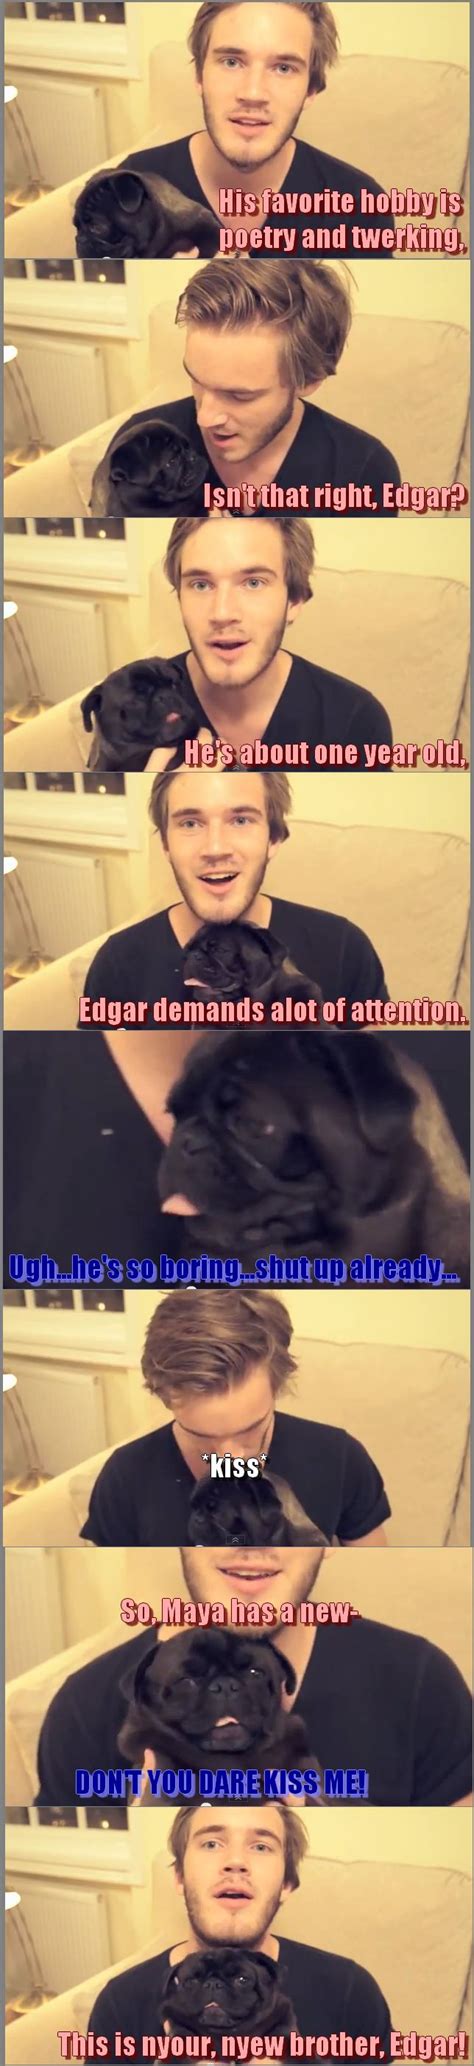 17 best images about pewdiepie and cutiepie marzia on pinterest cute couples youtubers and maya